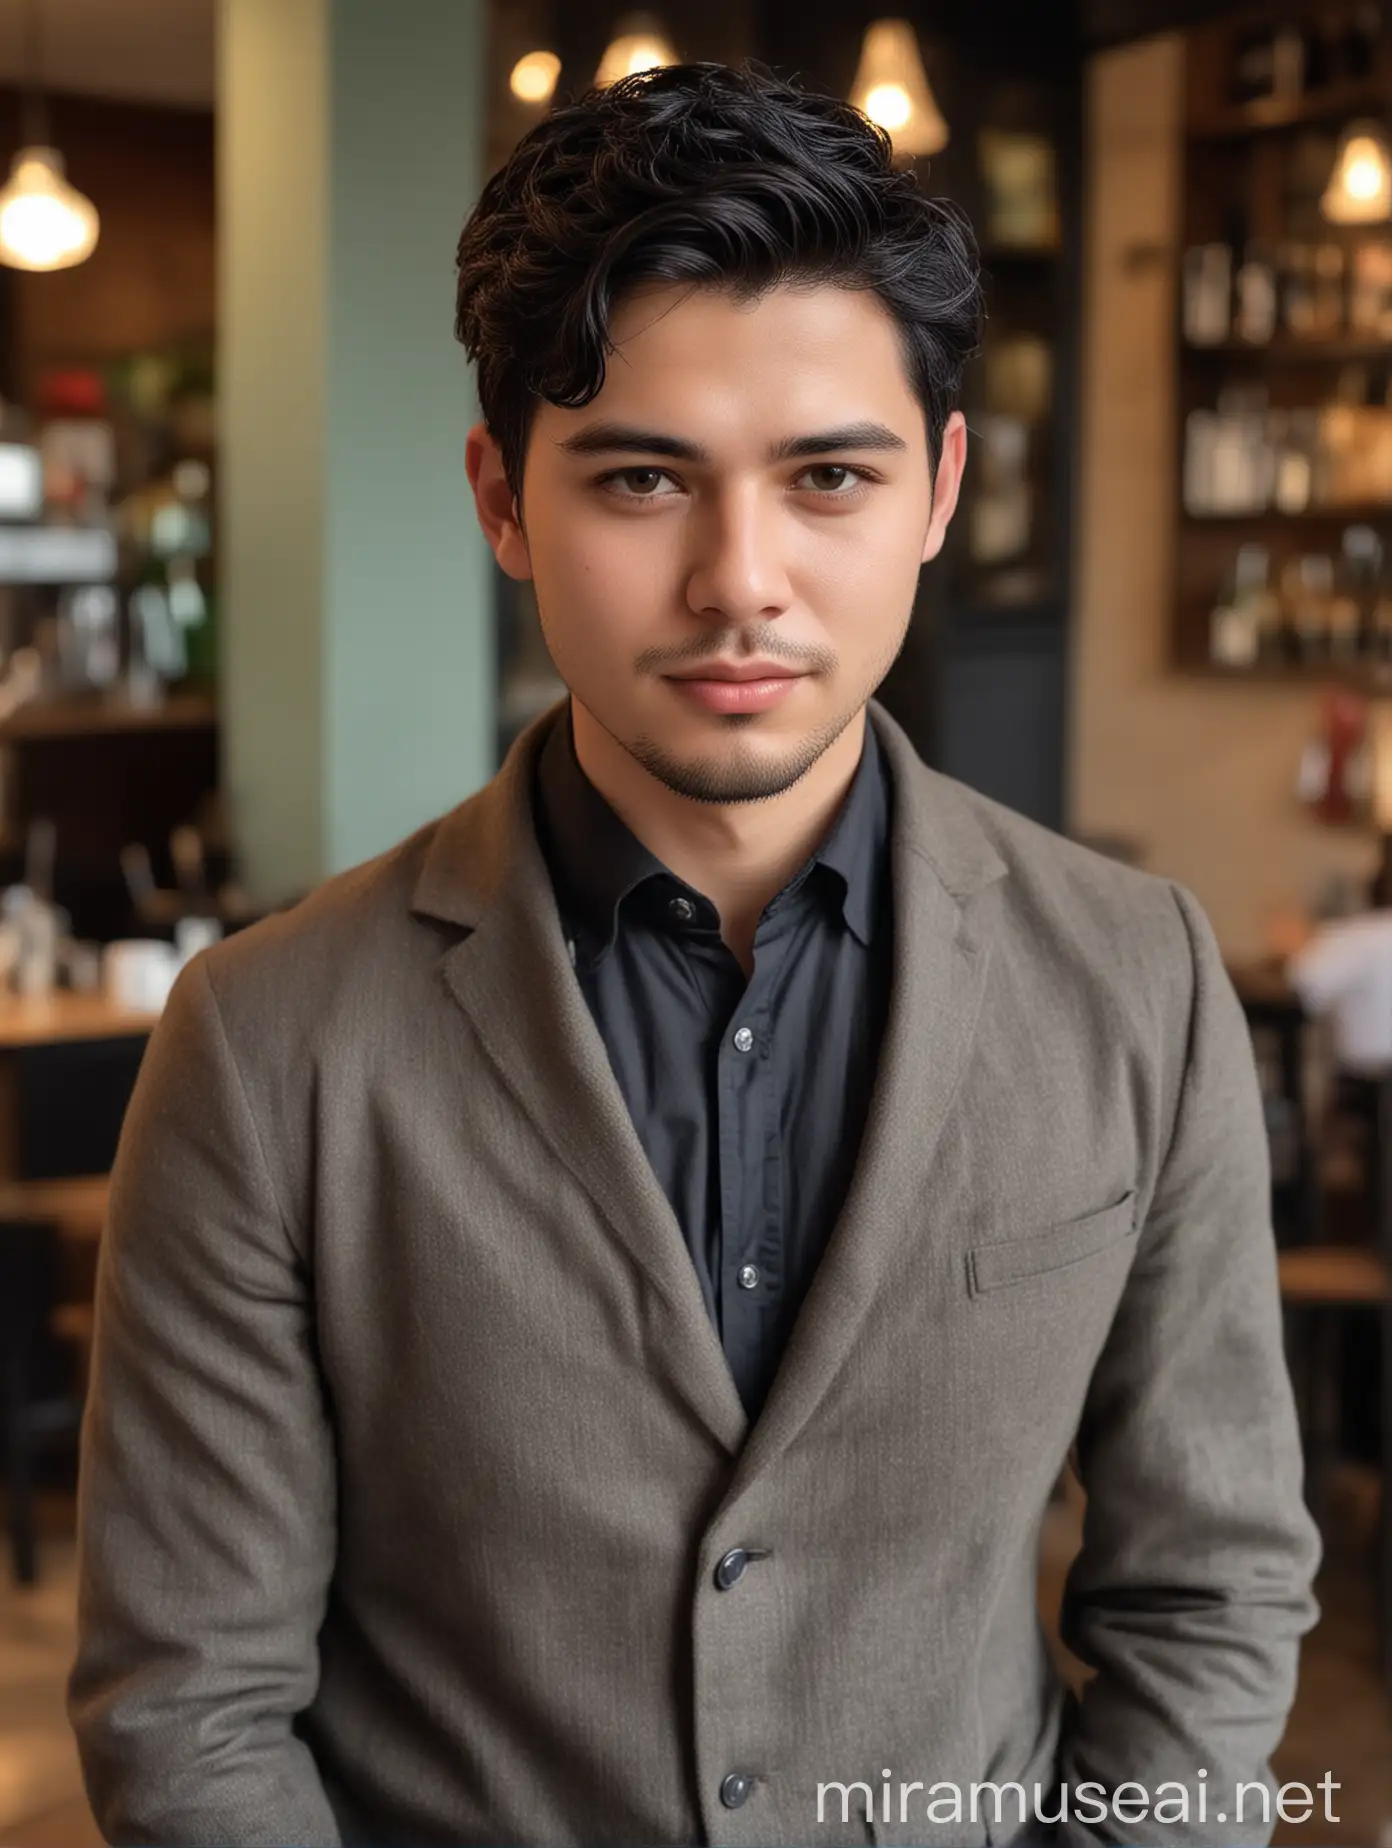 Elegant Young Man in Luxurious Attire at Cafe